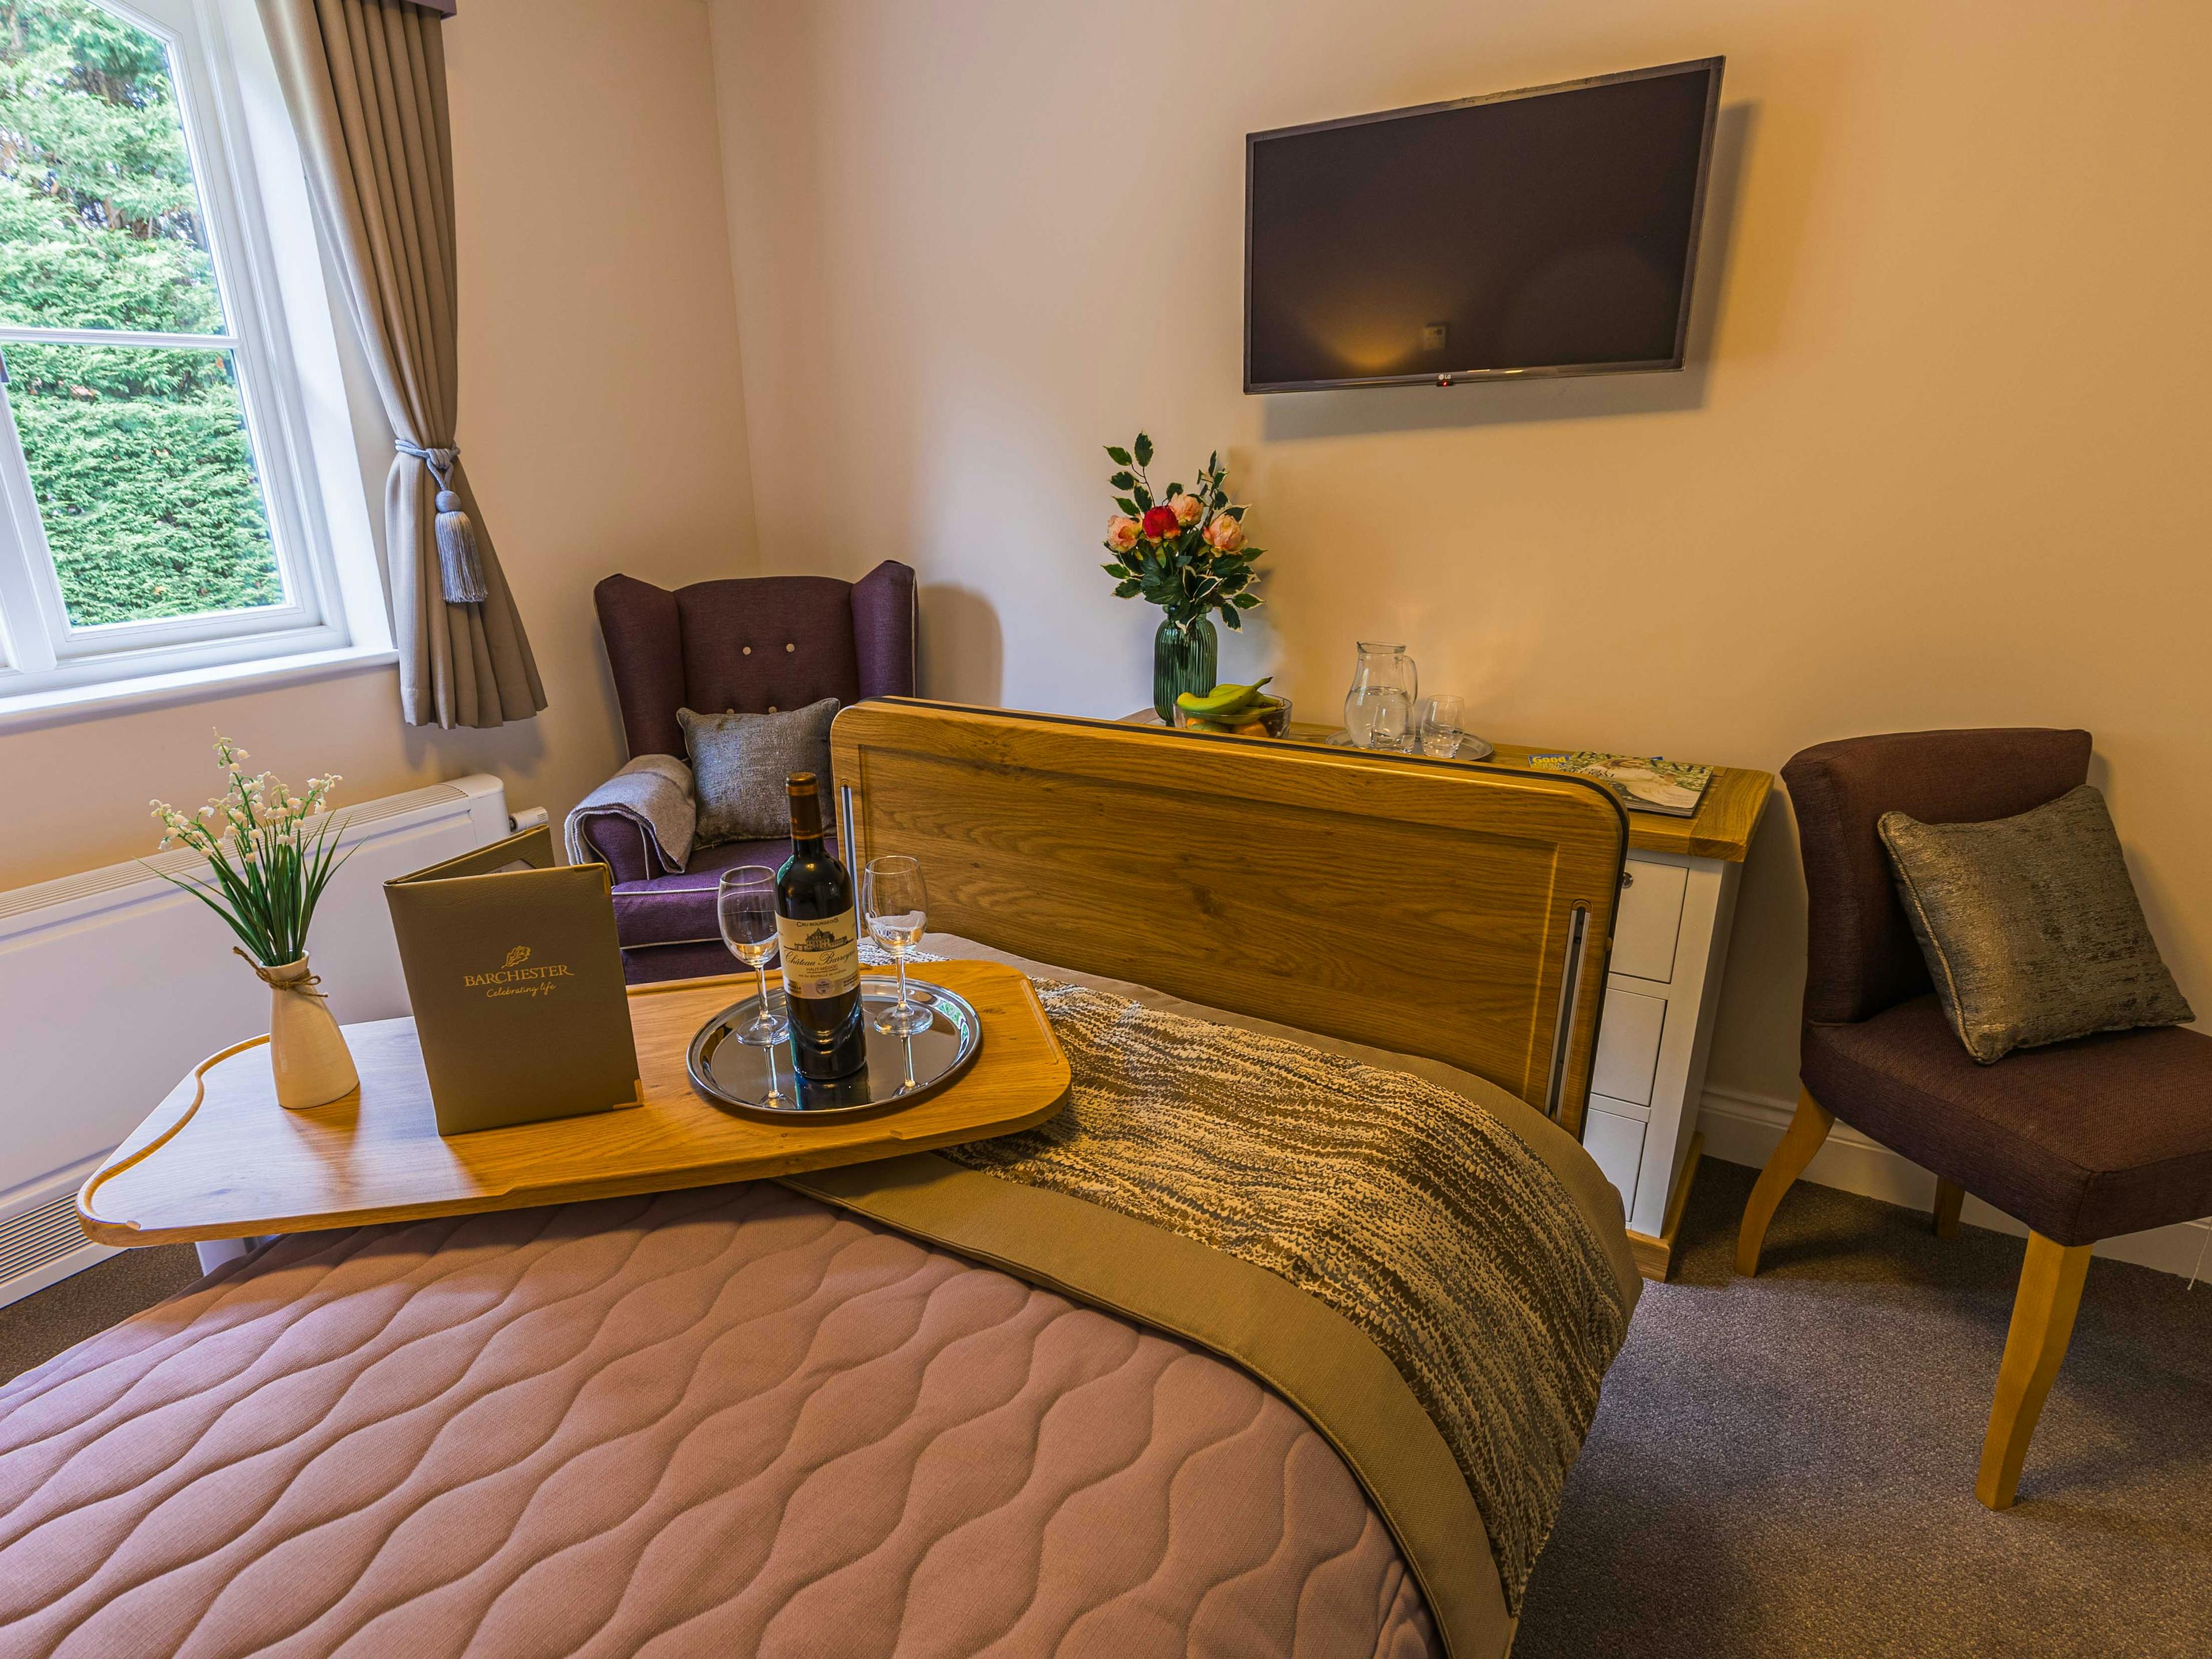 Bedroom at Sutton Valence Care Home in Maidstone, Kent